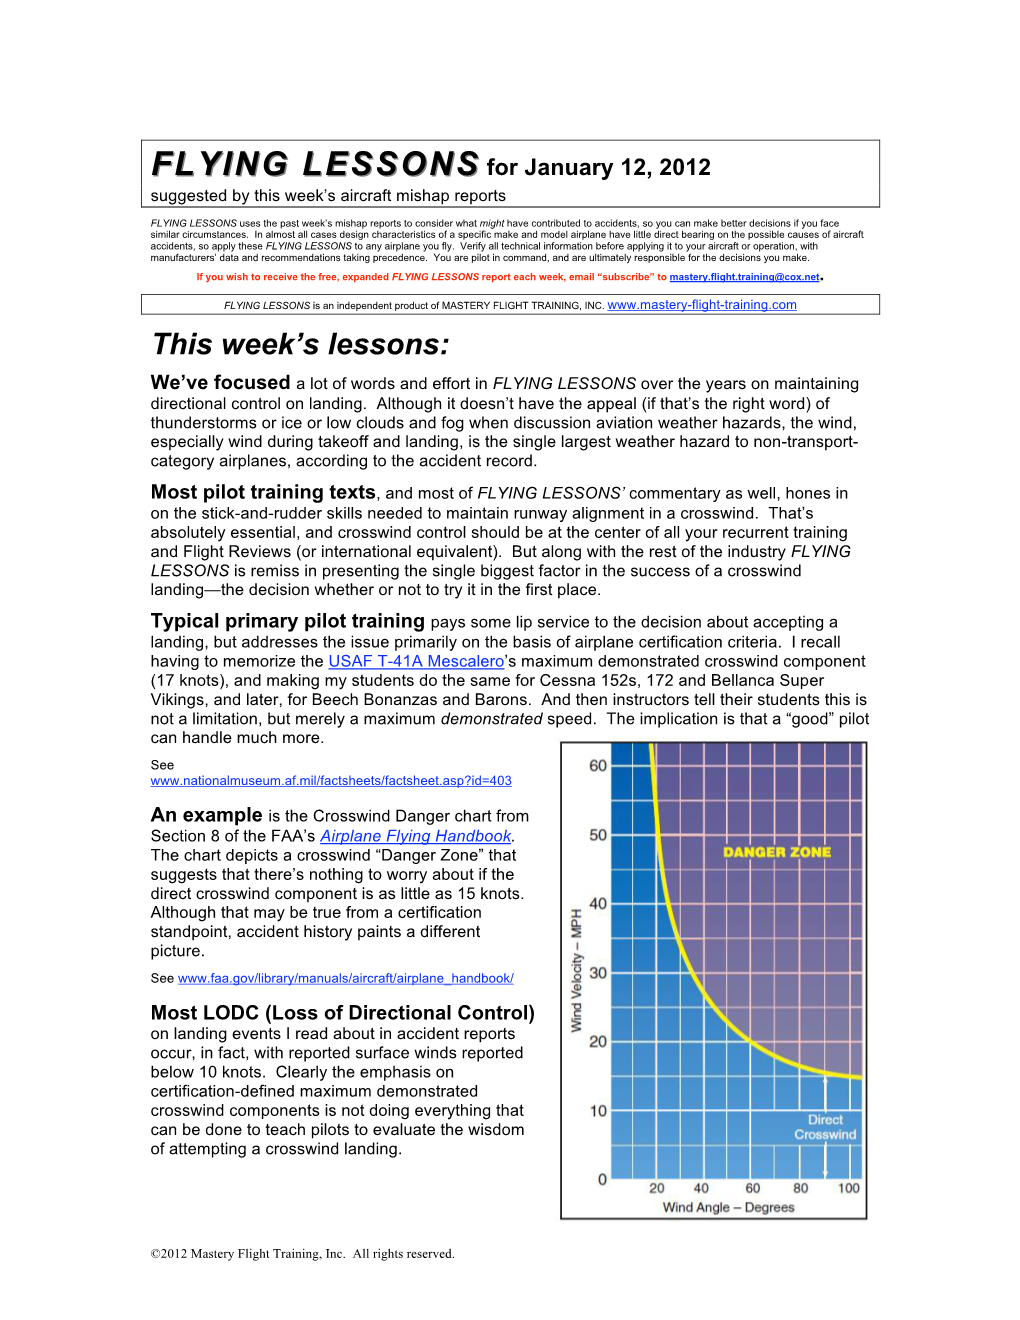 FLYING LESSONS for January 12, 2012 Suggested by This Week’S Aircraft Mishap Reports